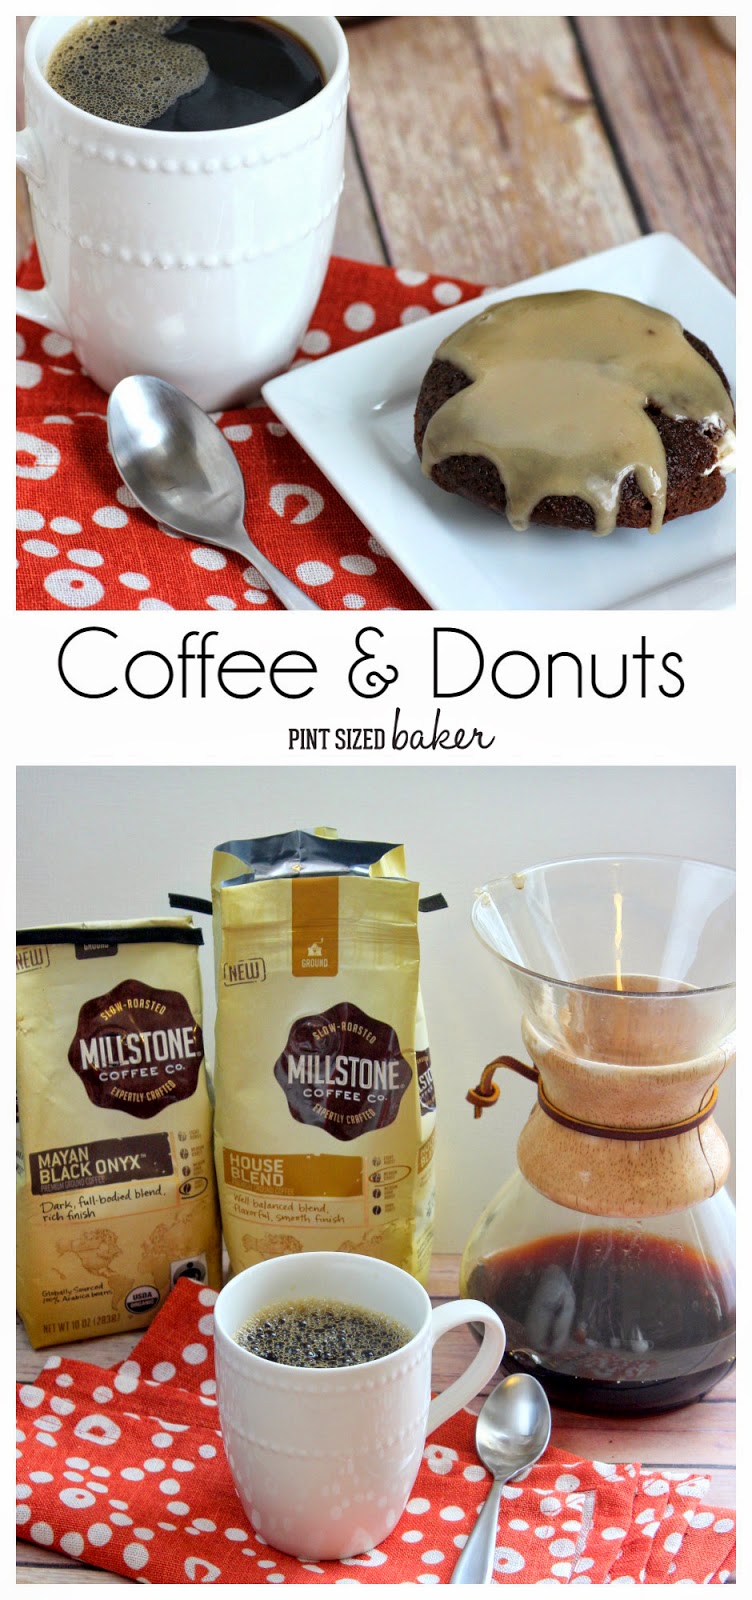 Cream Filled Chocolate Donuts with Coffee Glaze. Wake up with #MillstoneCoffee and Fresh Donuts!